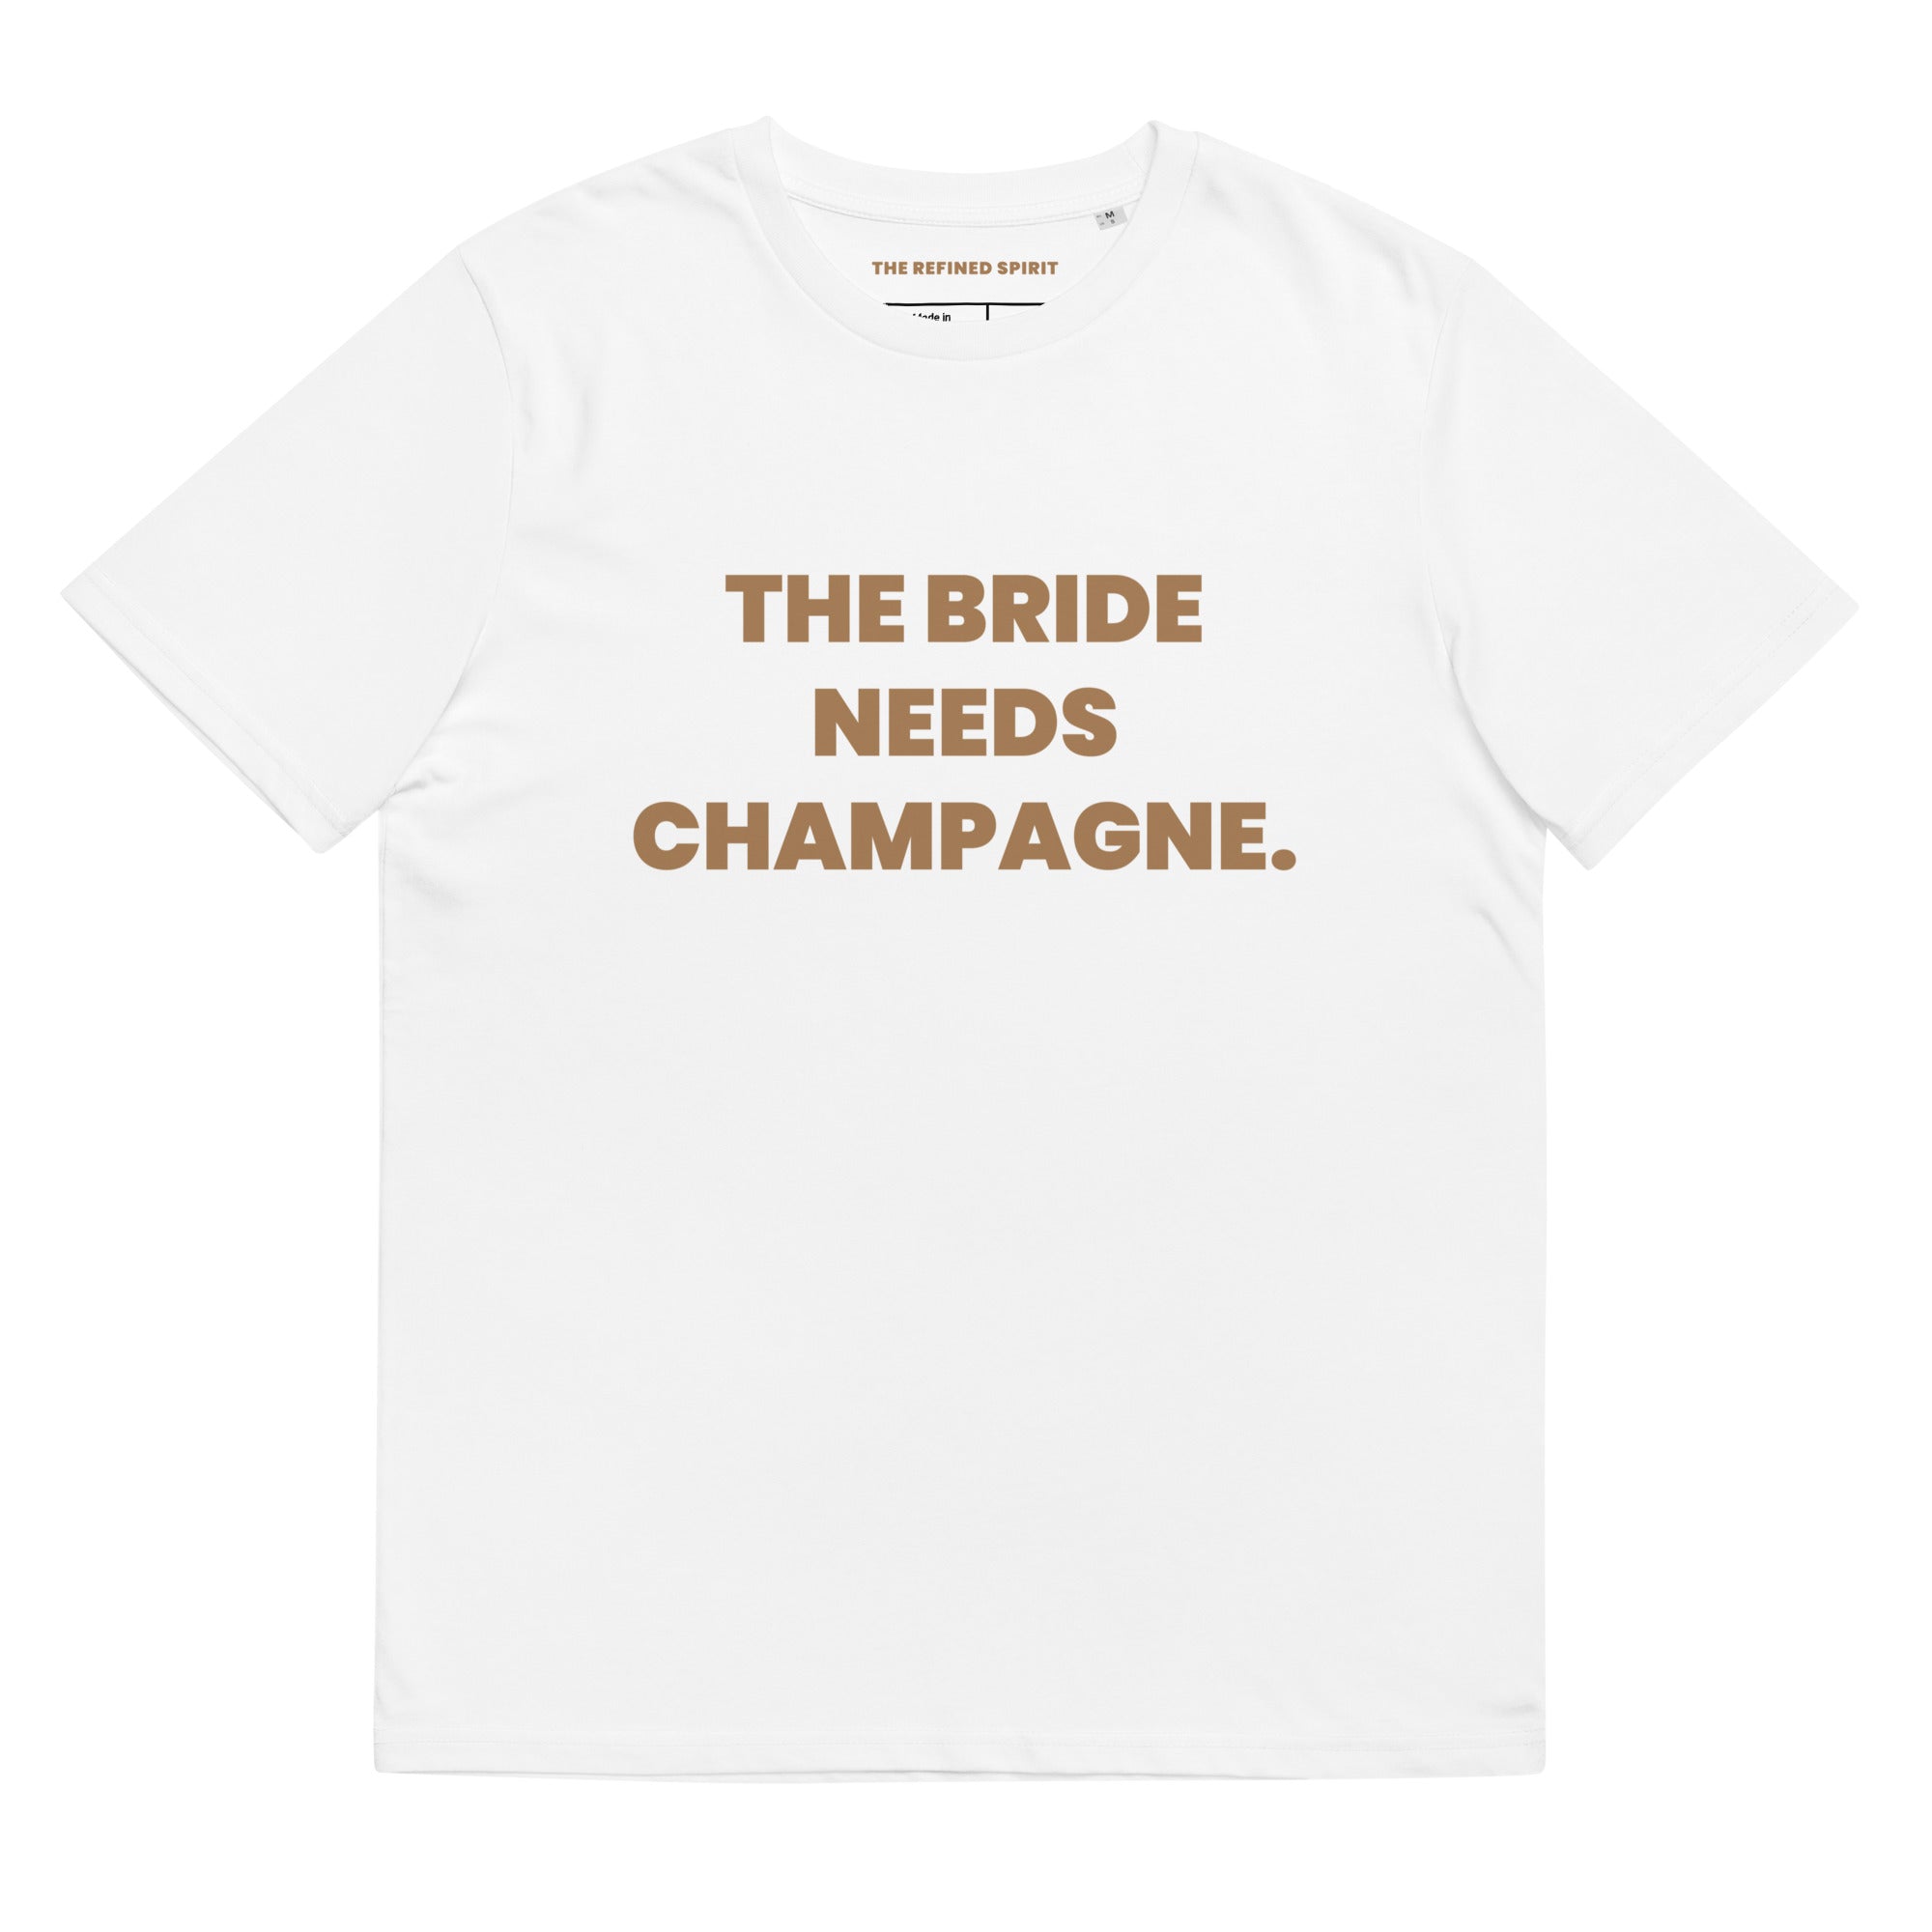 The Bride needs Champagne - Organic T-shirt - The Refined Spirit